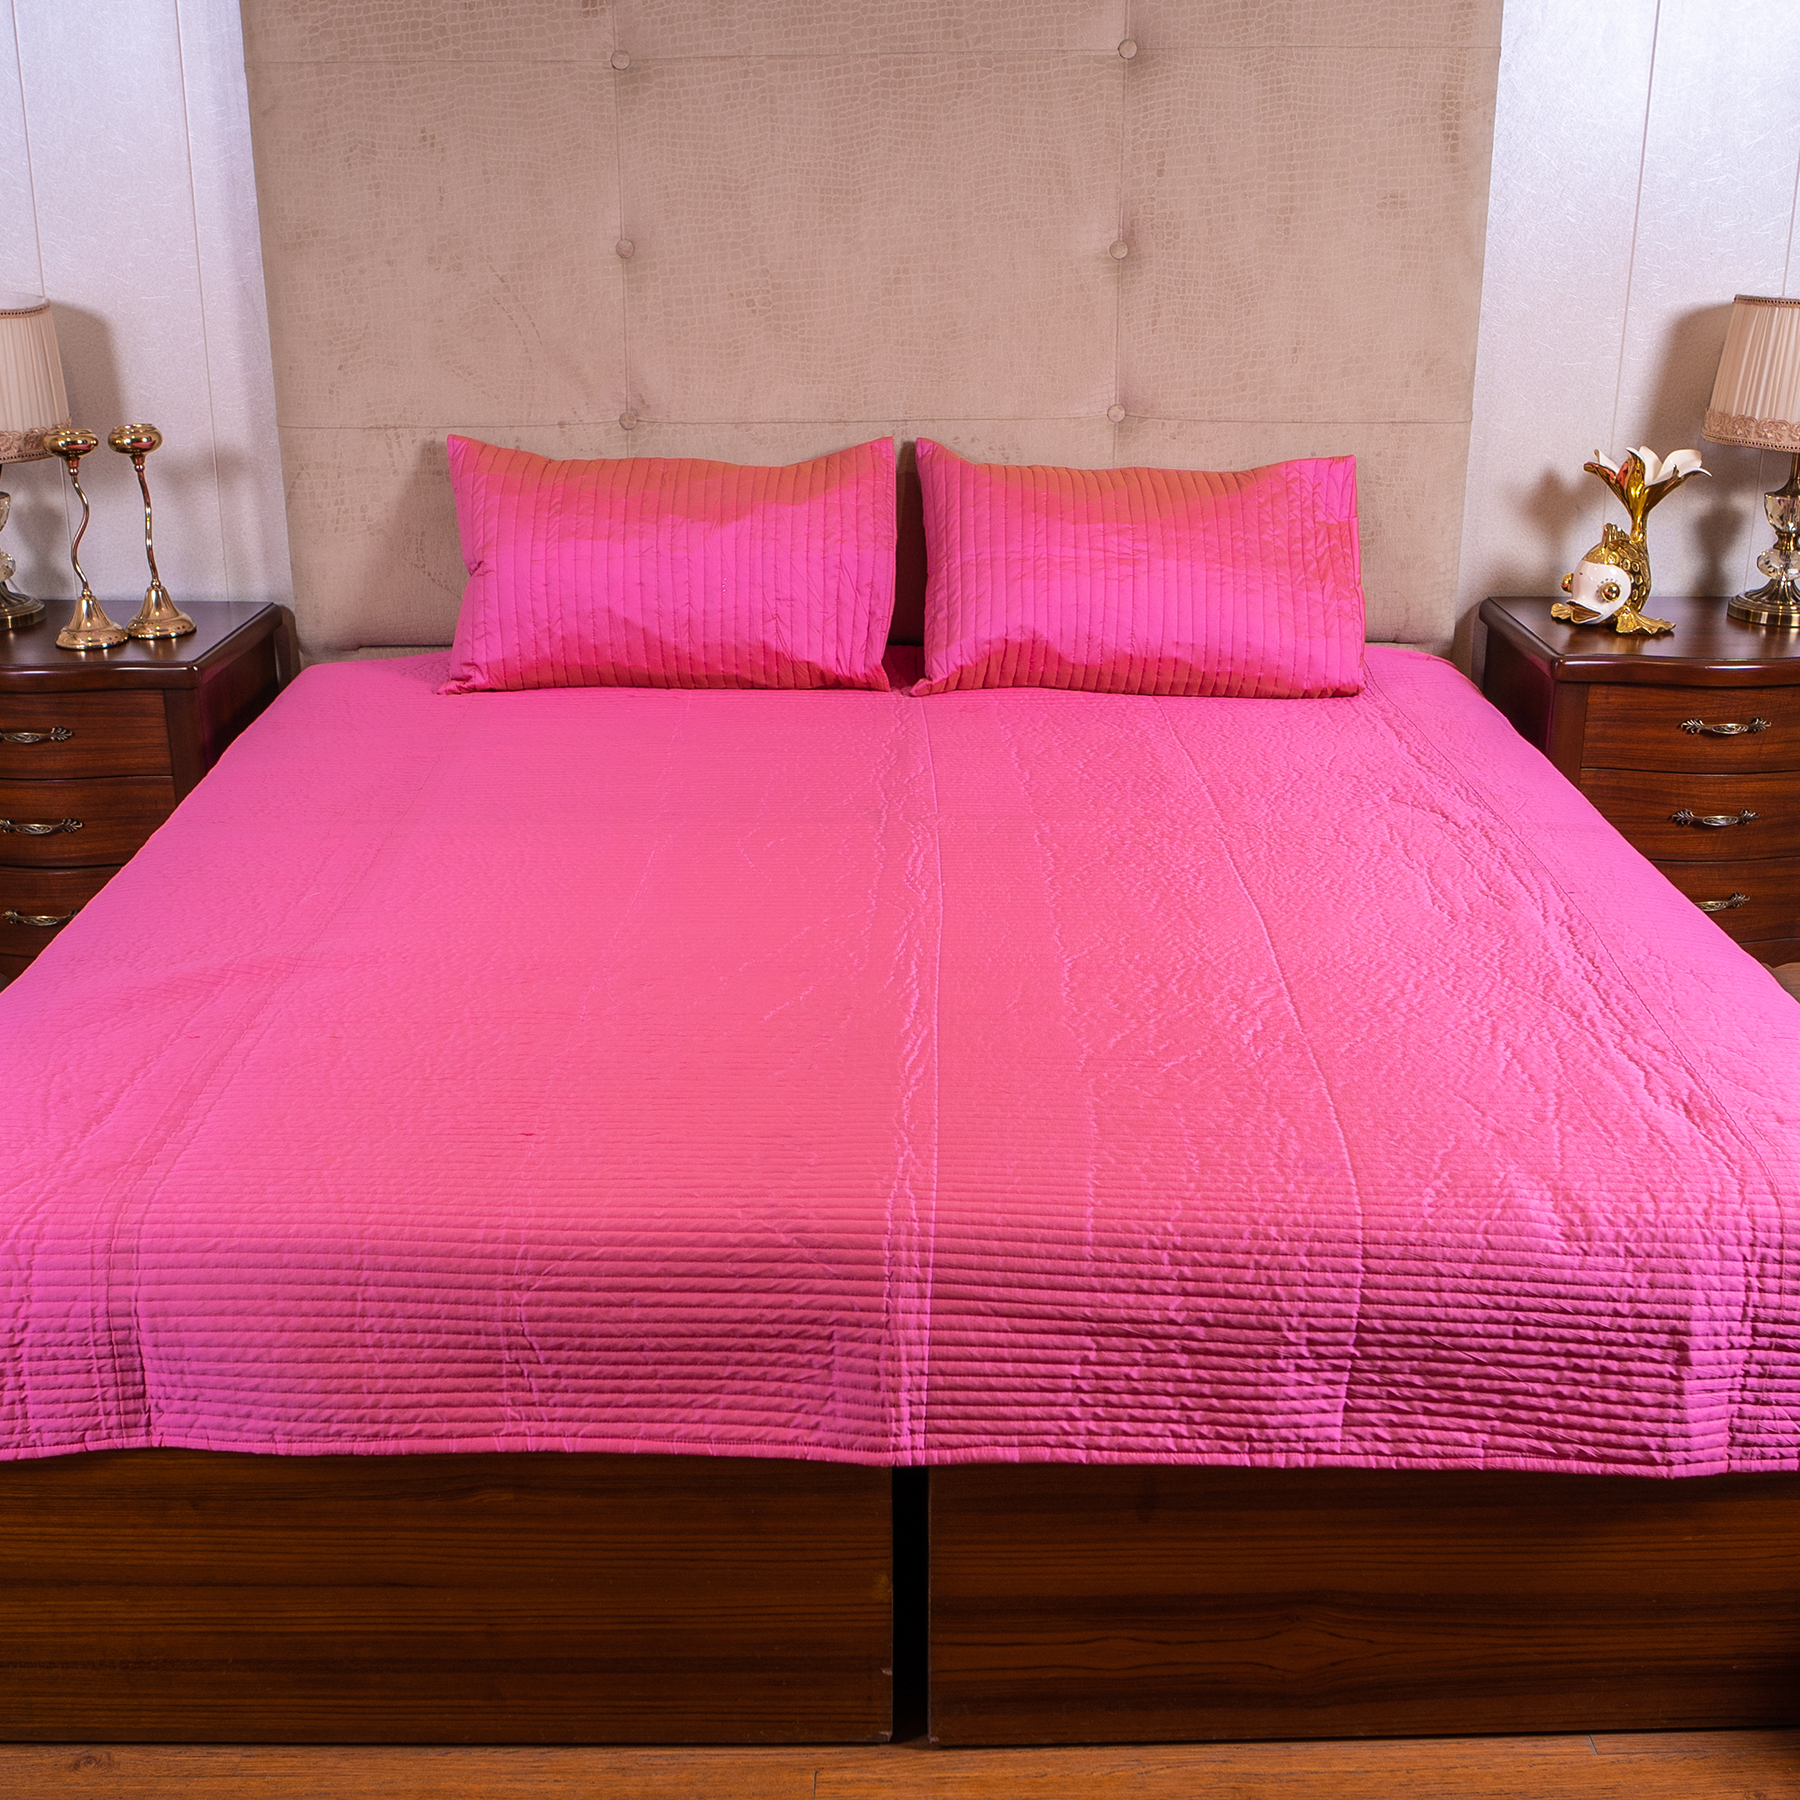 The LuxeLife Pink Silk Solid Bedcover